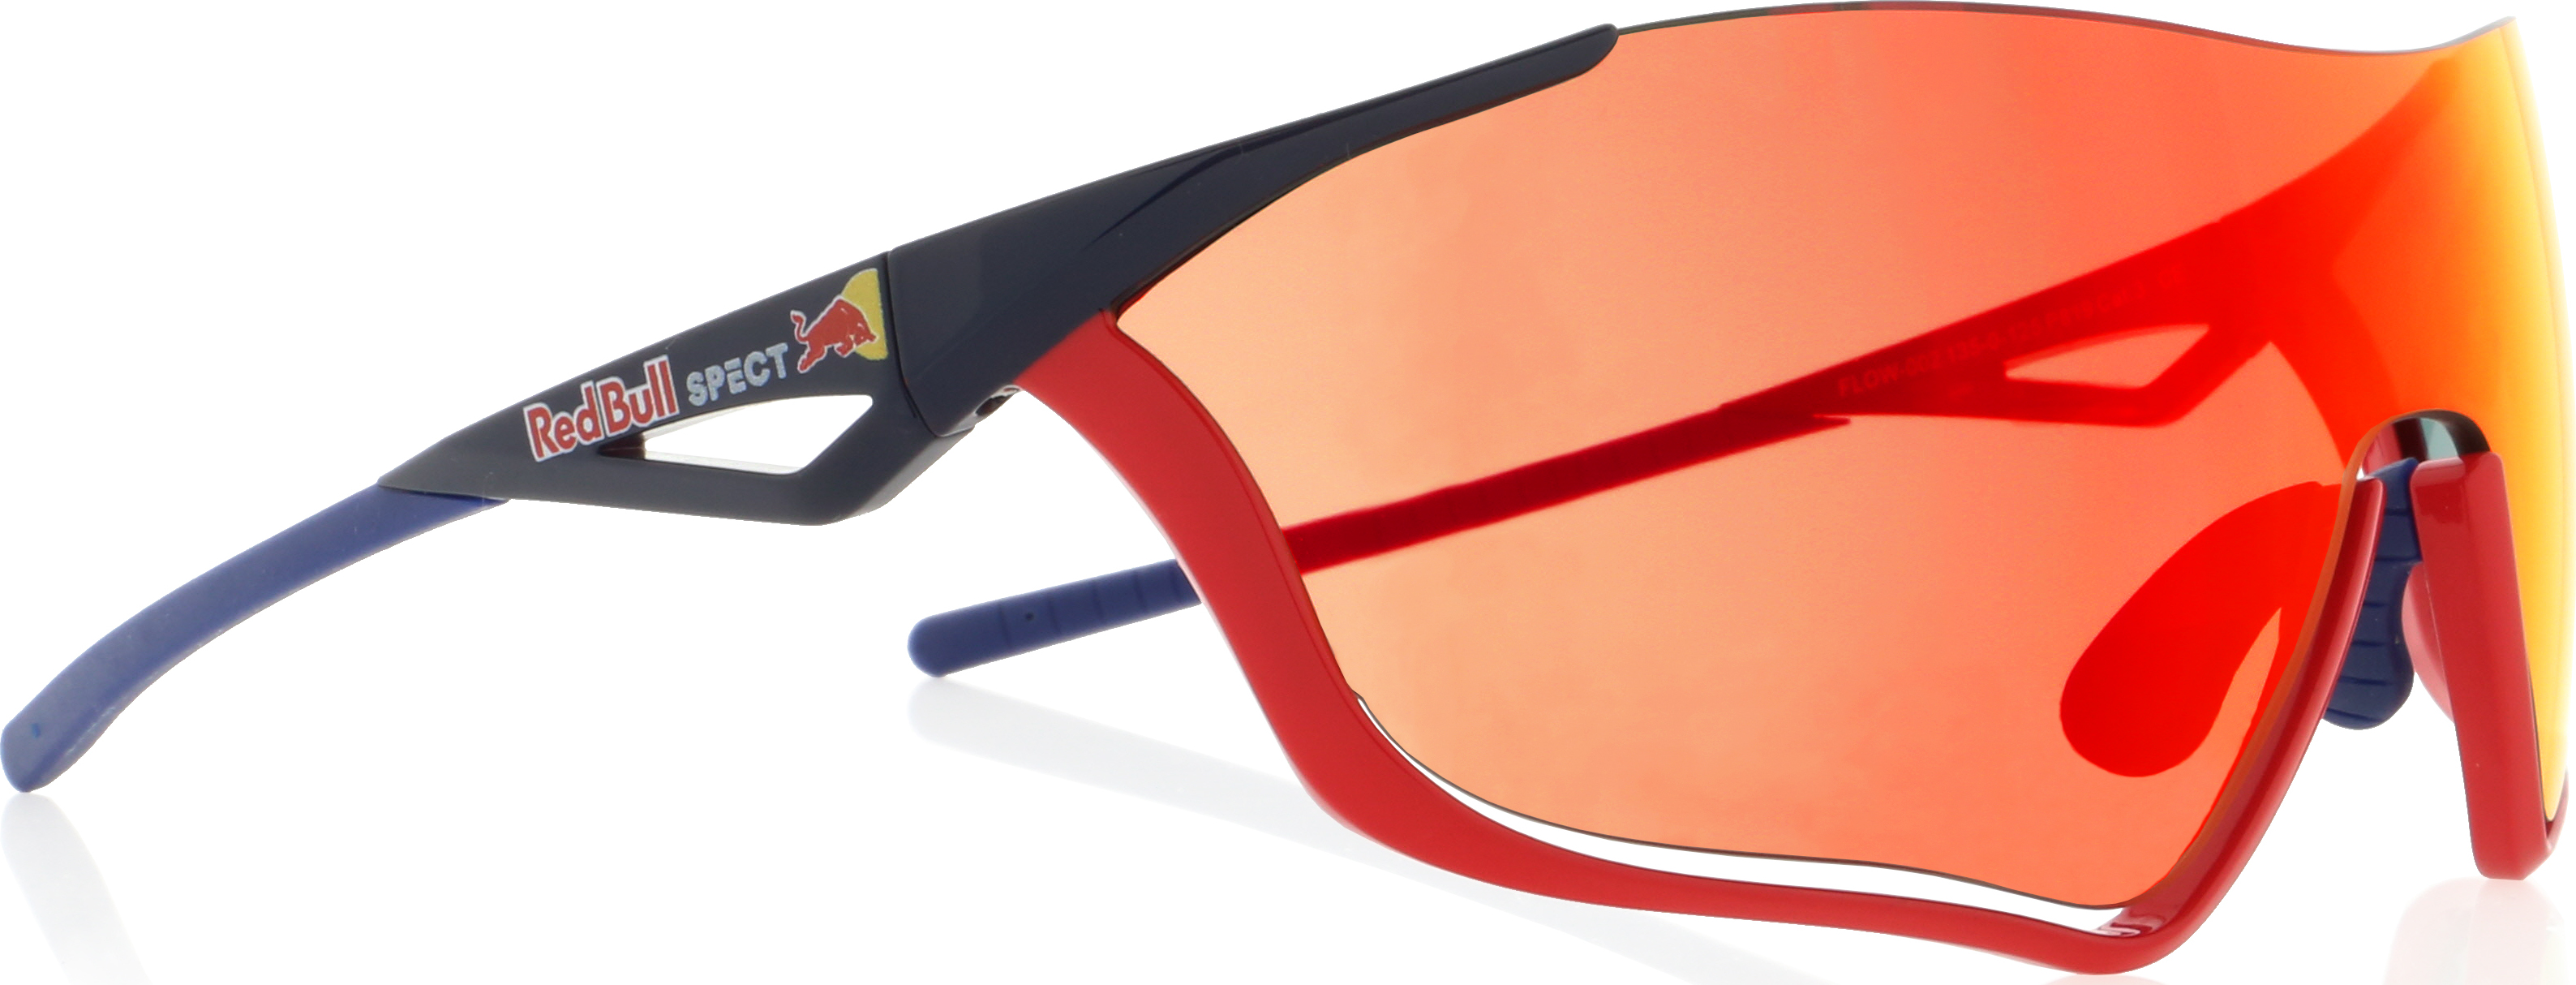 Red Bull Spect Flow Matt Blue/Smoke with Red Mirror